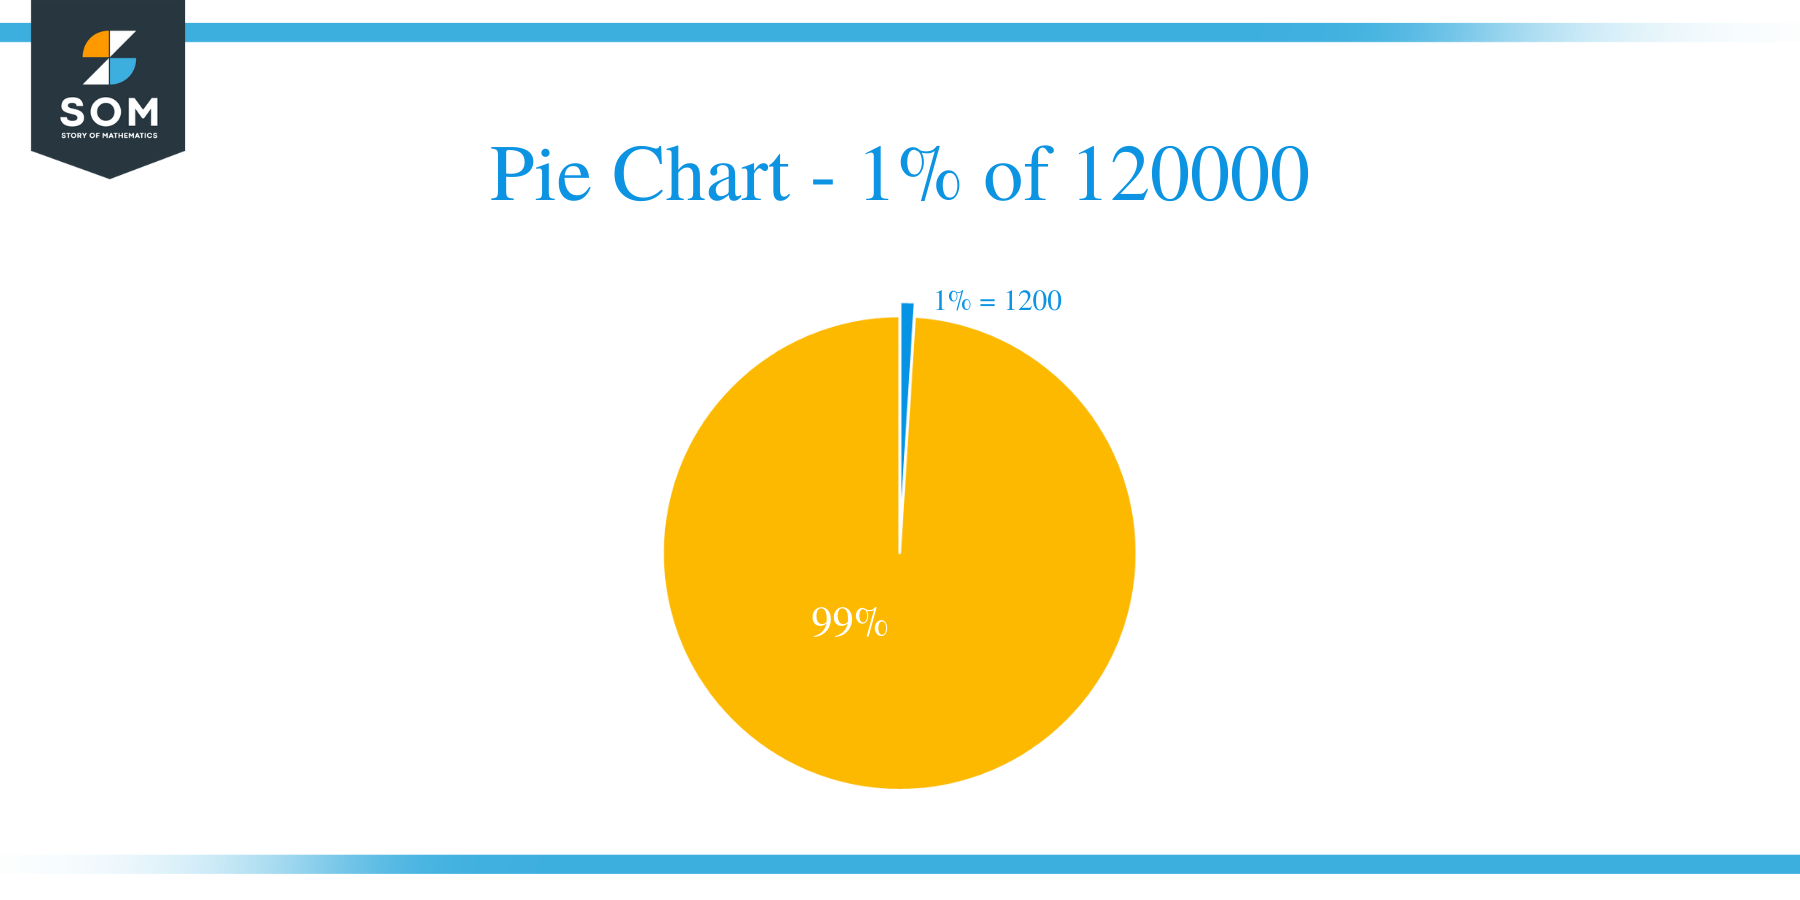 pie chart of 1 percent of 120000